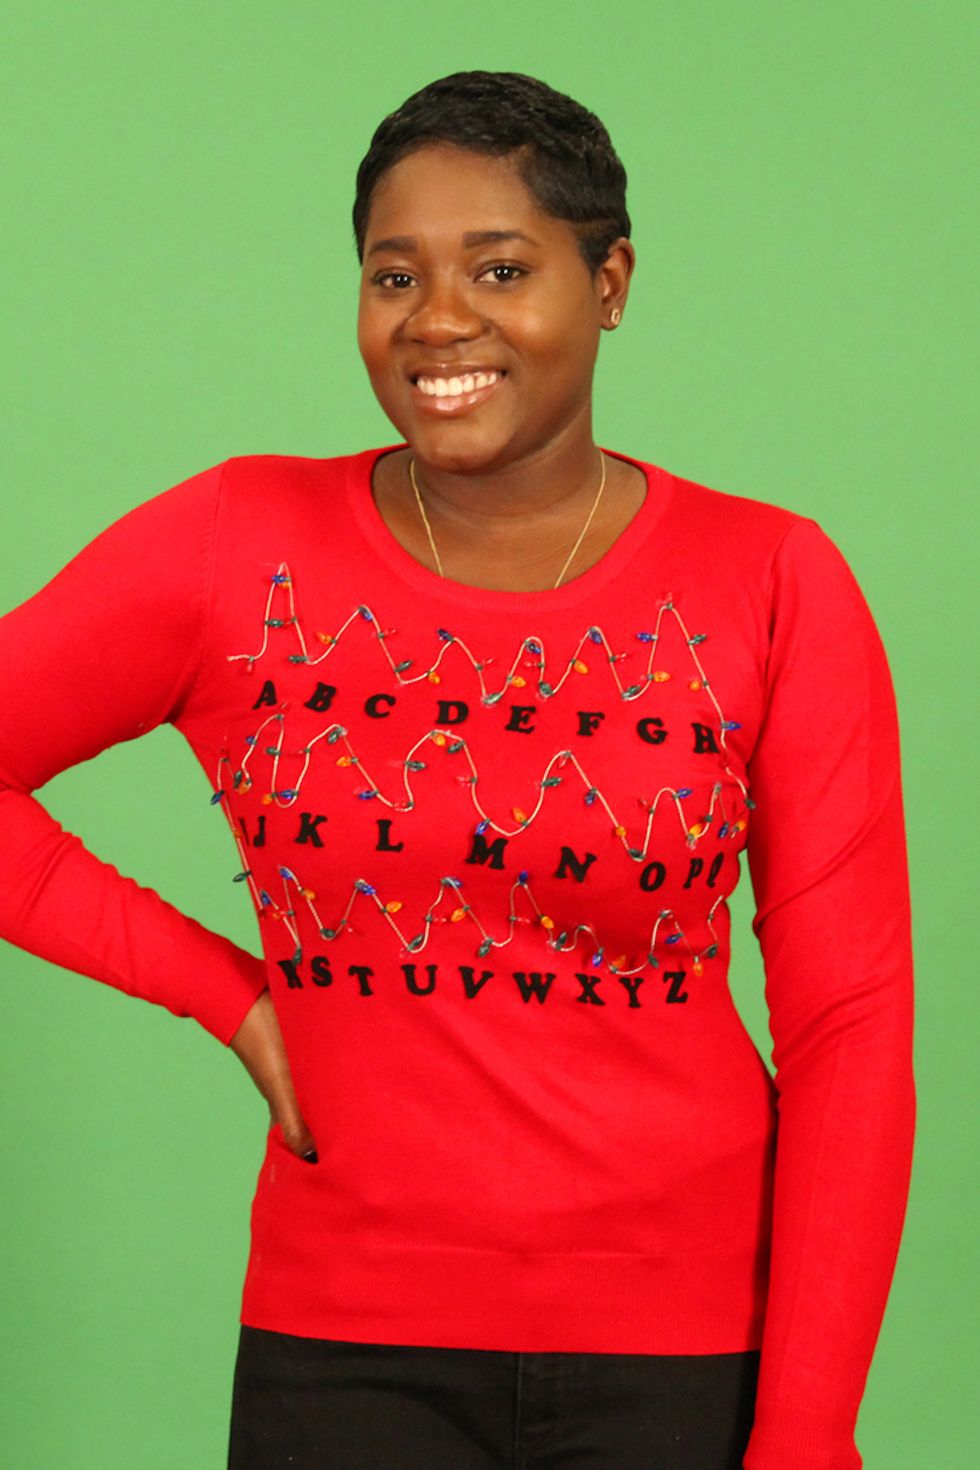 Last Minute DIY Ugly Christmas Sweater - Simply Full of Delight